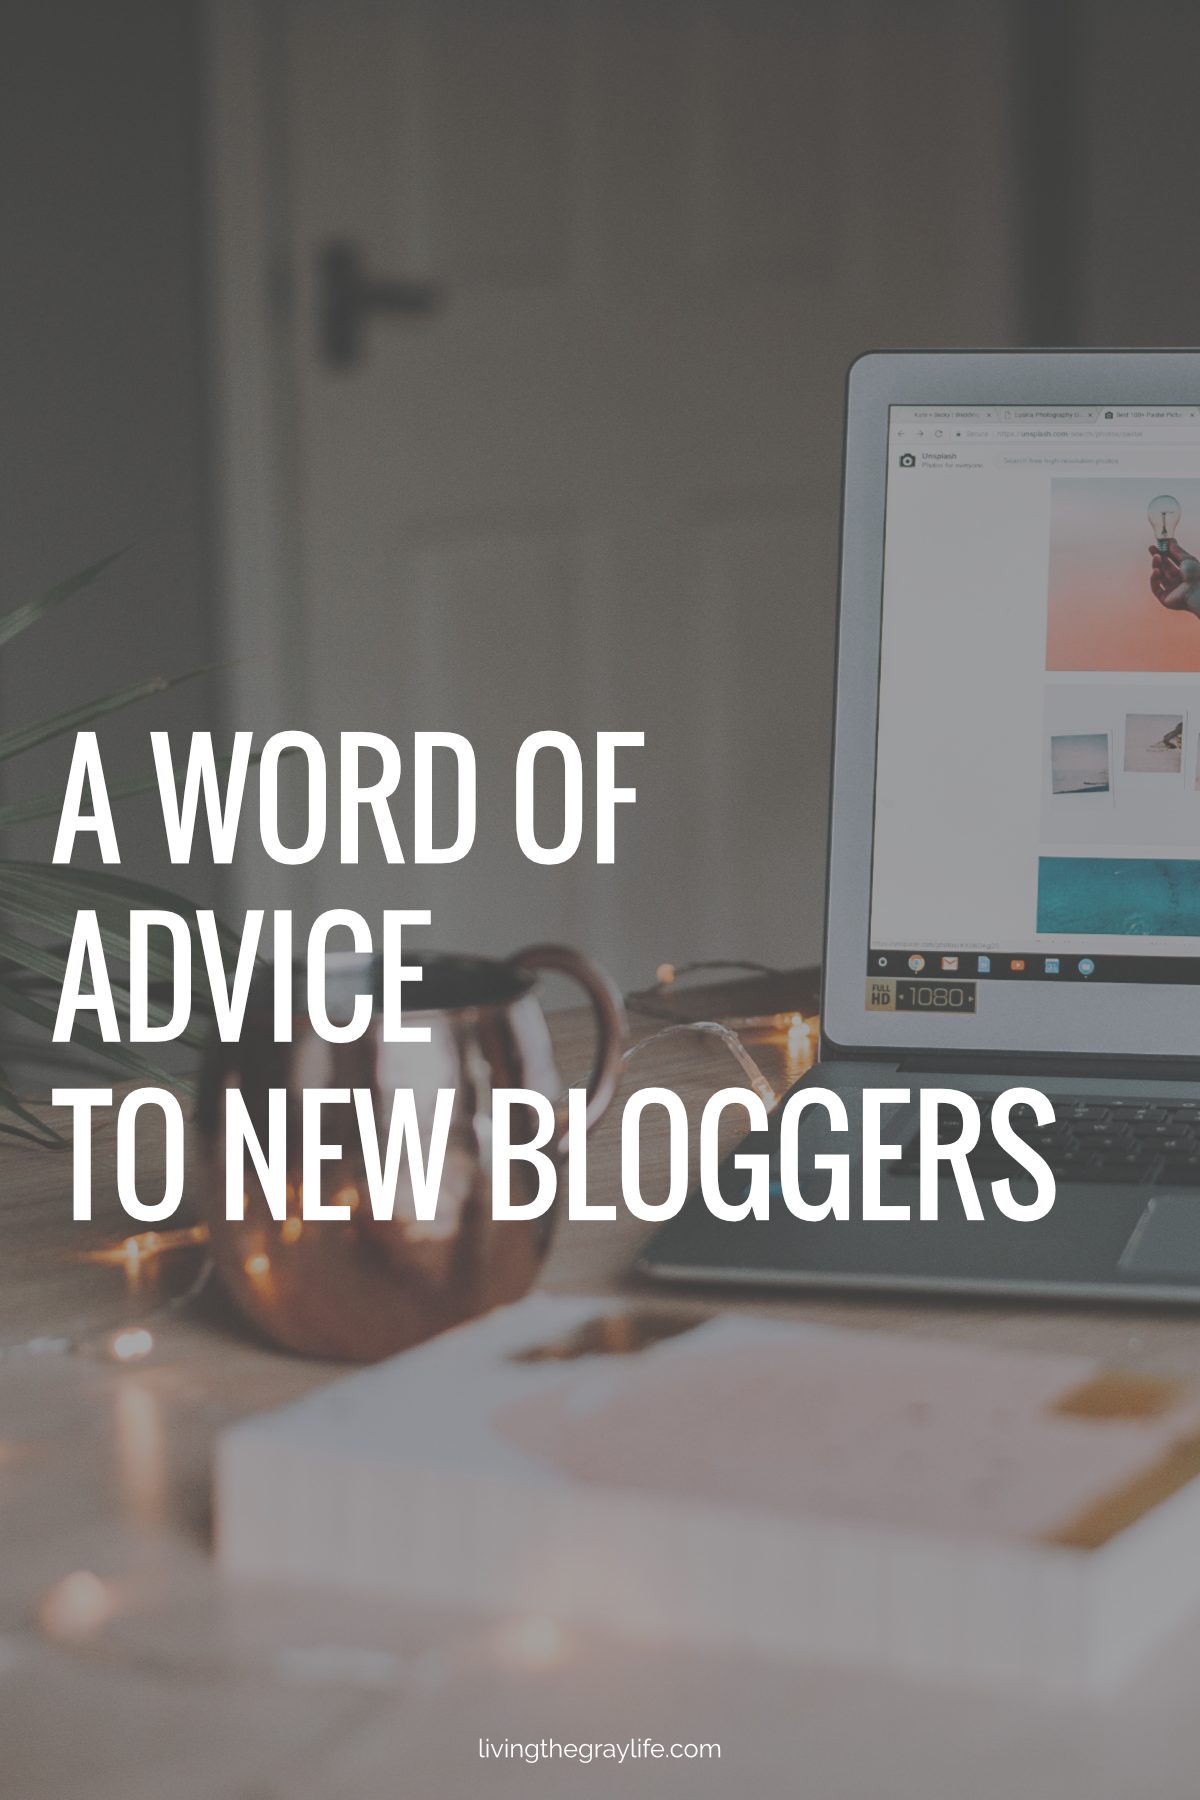 A Word of Advice to New Bloggers